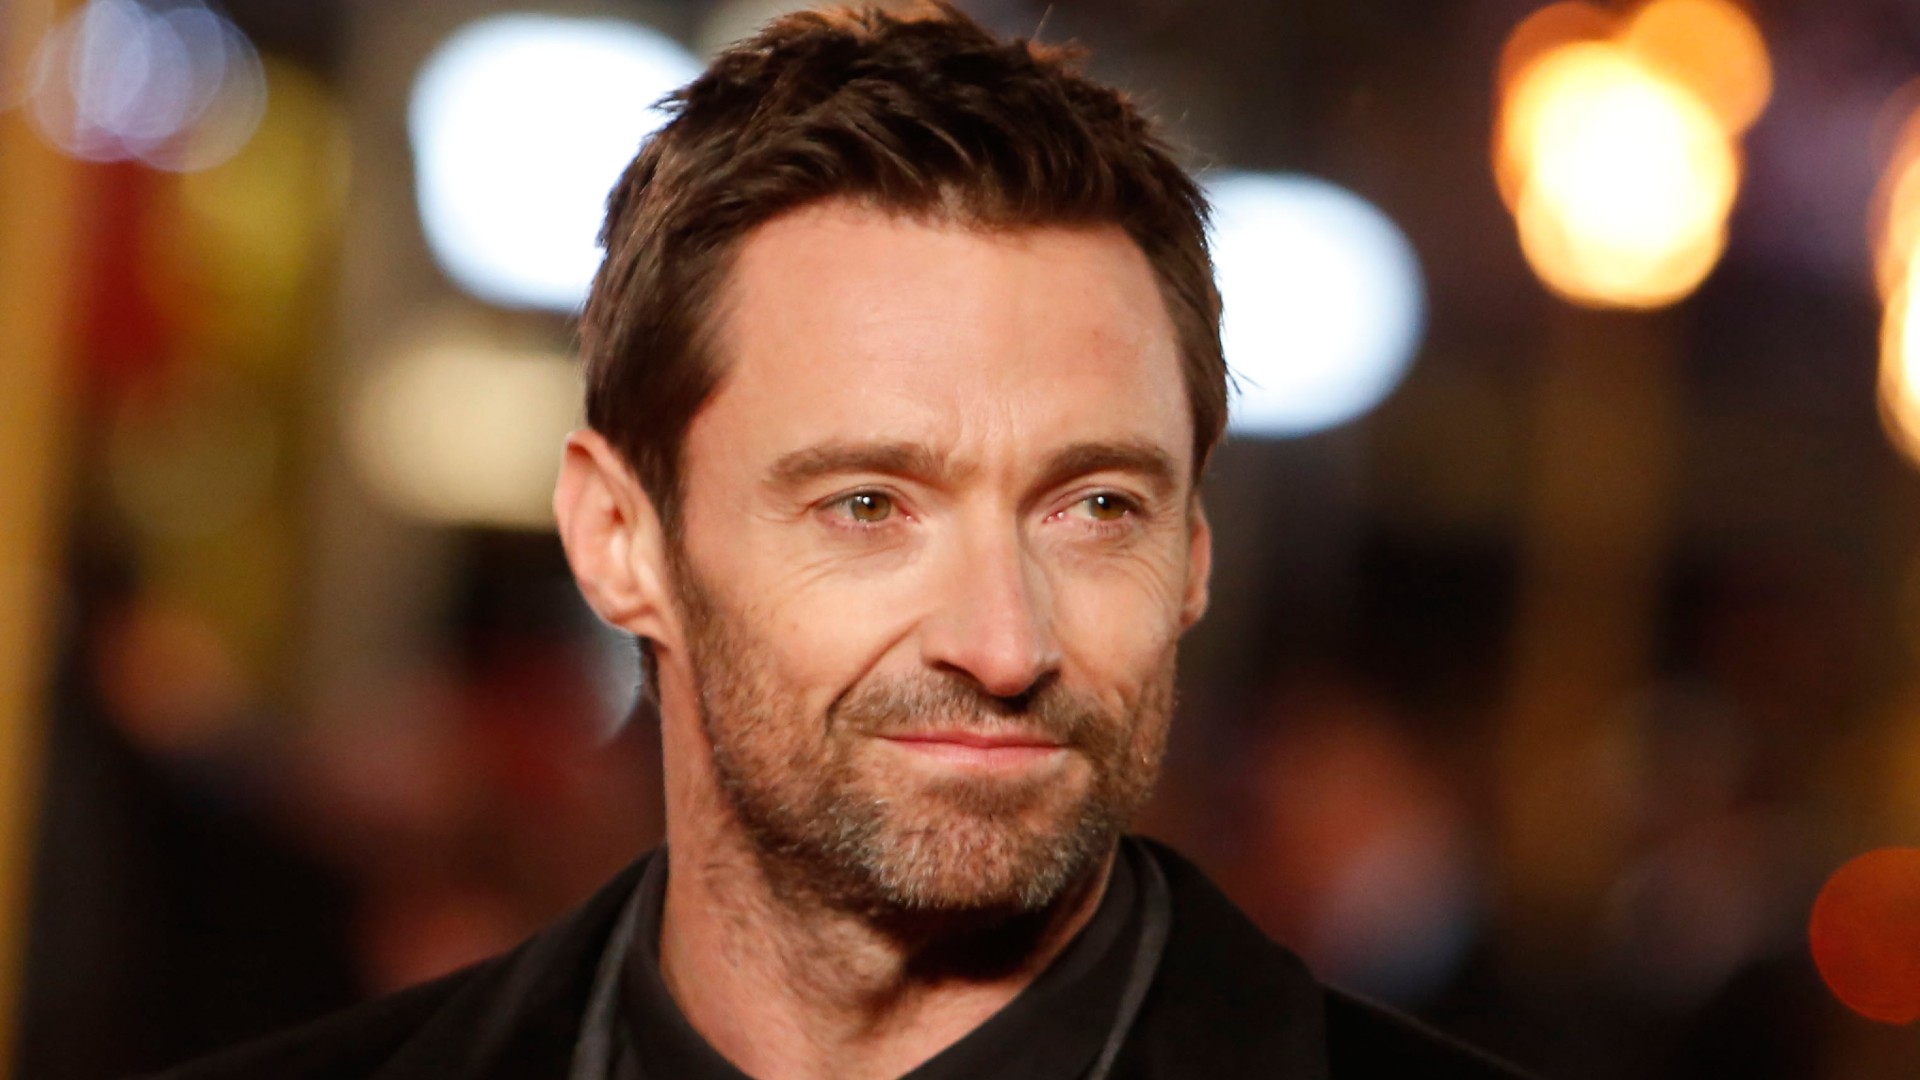 Here's Who to Blame for Hugh Jackman Walking Away From His Biggest Role